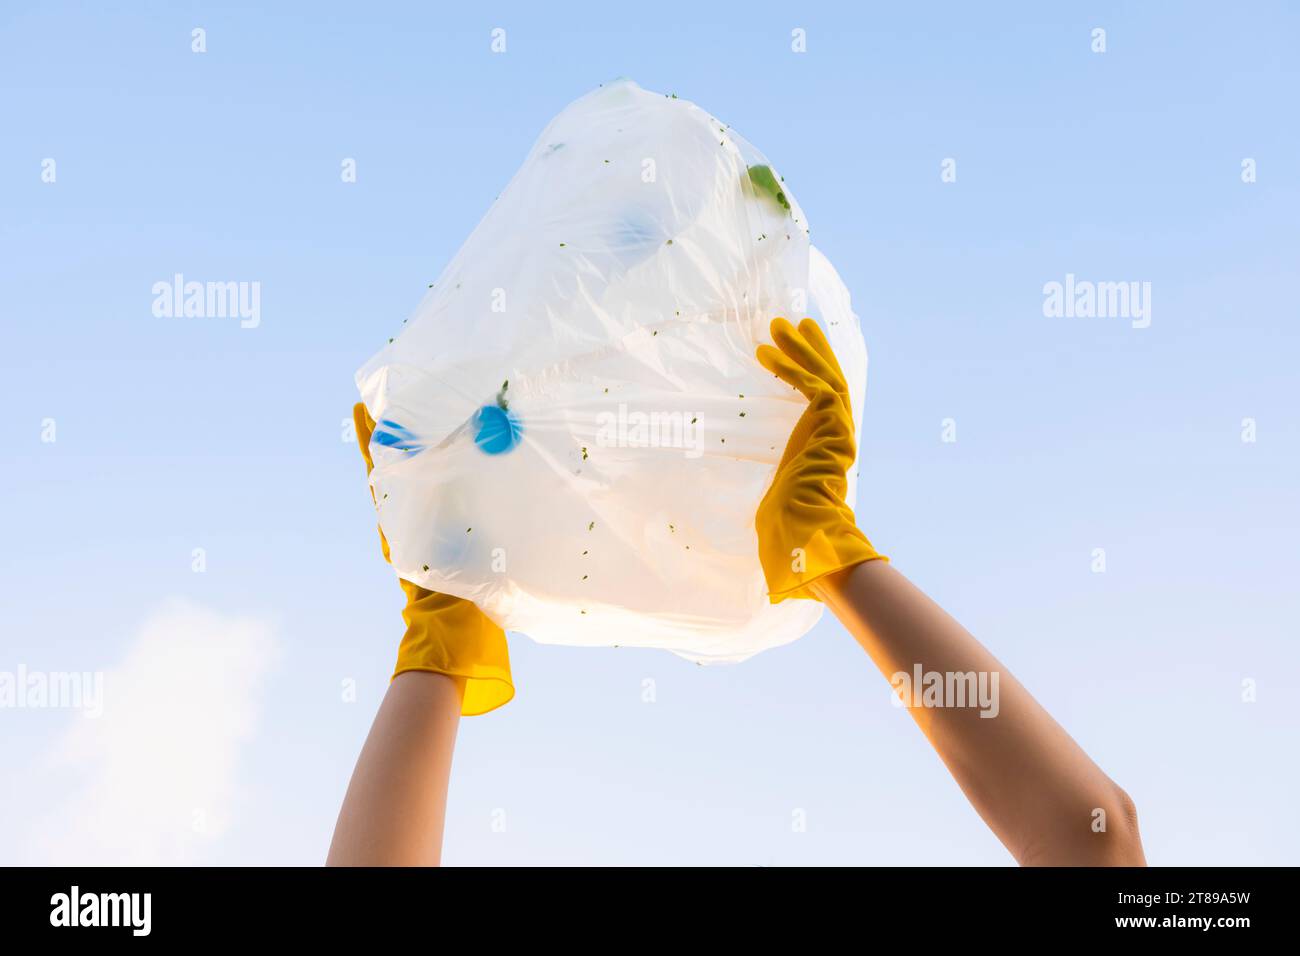 A young volunteer's hand raises a garbage bag of plastic bottles into the sky. On World Environment Day Stock Photo